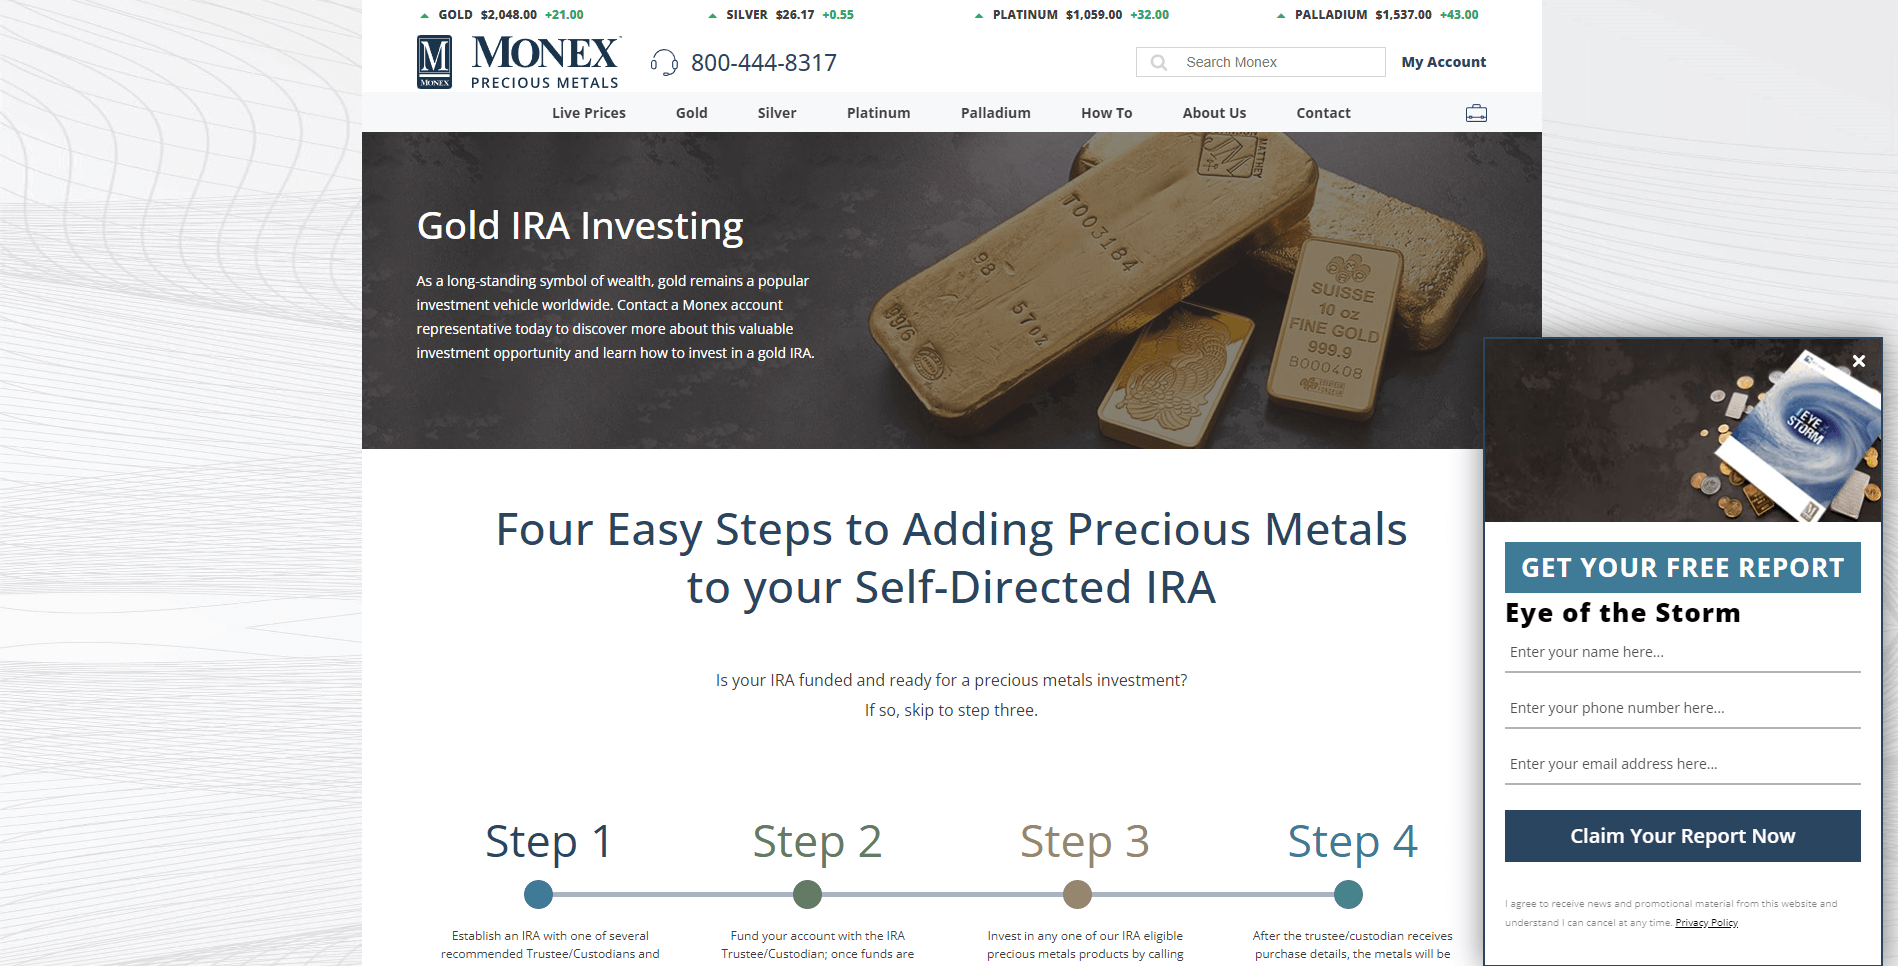 monex precious metals gold ira review products and services